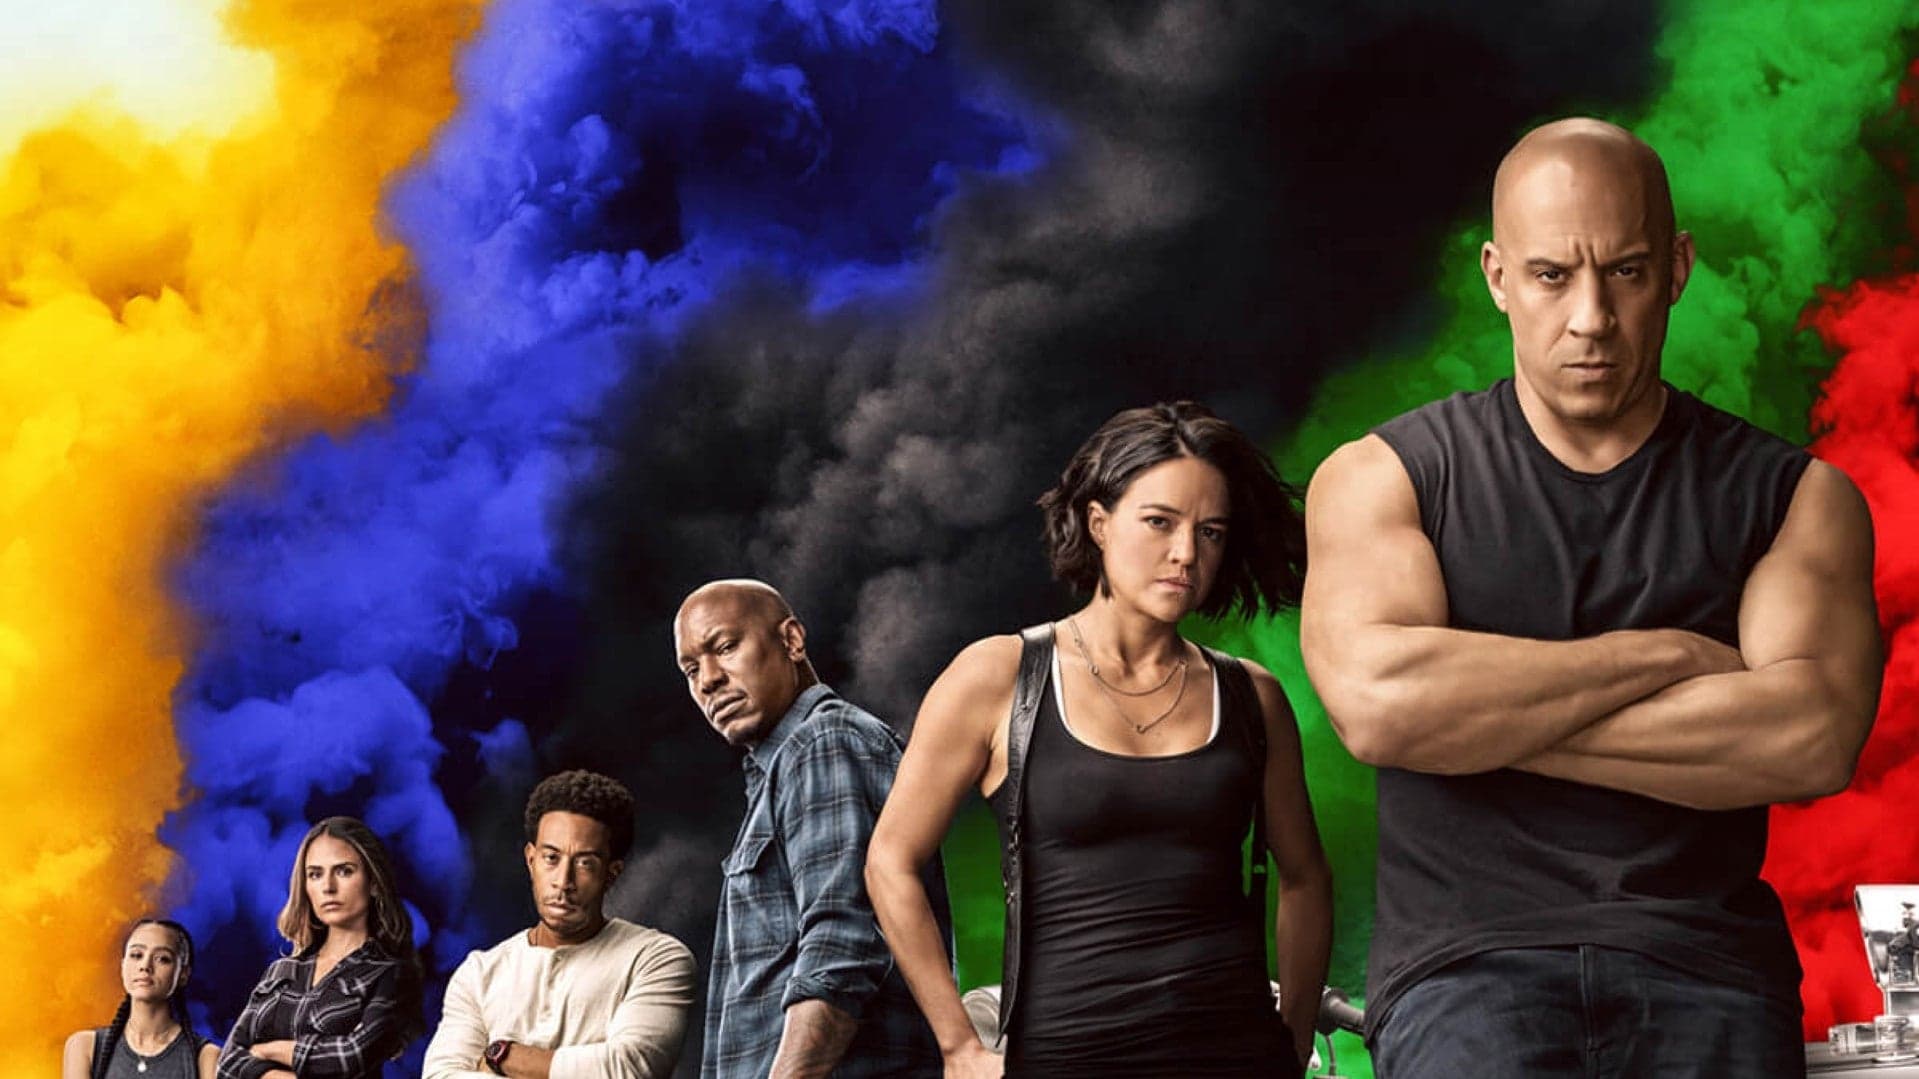 How Do You Think the Fast & Furious Franchise Should End?